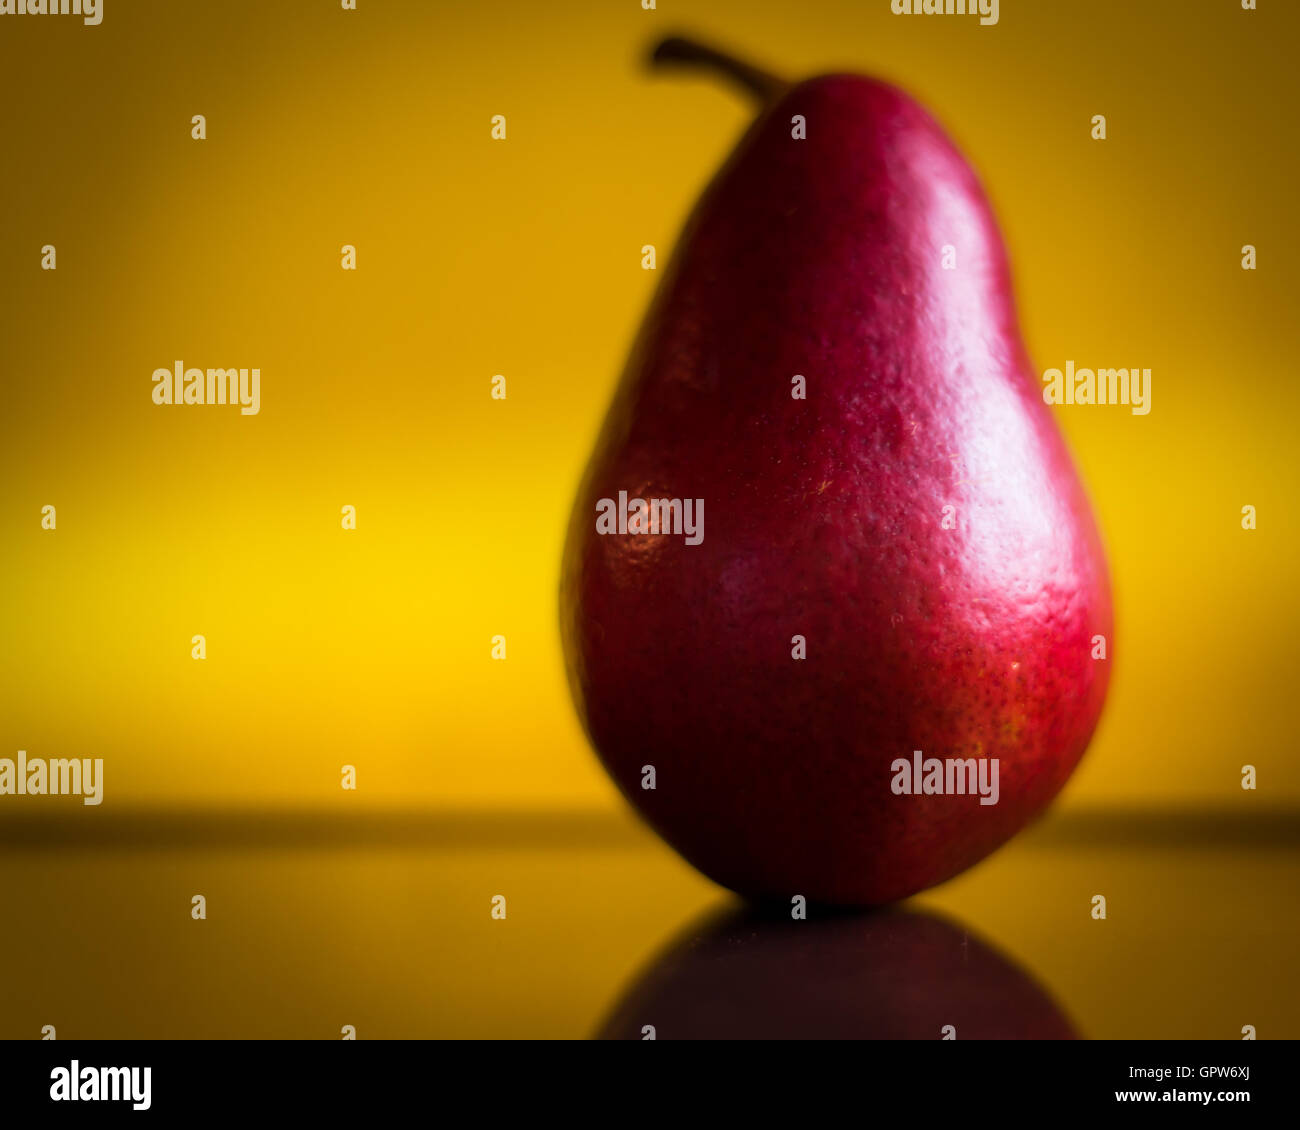 A perfect red Anjou Pear against a yellow background. Stock Photo